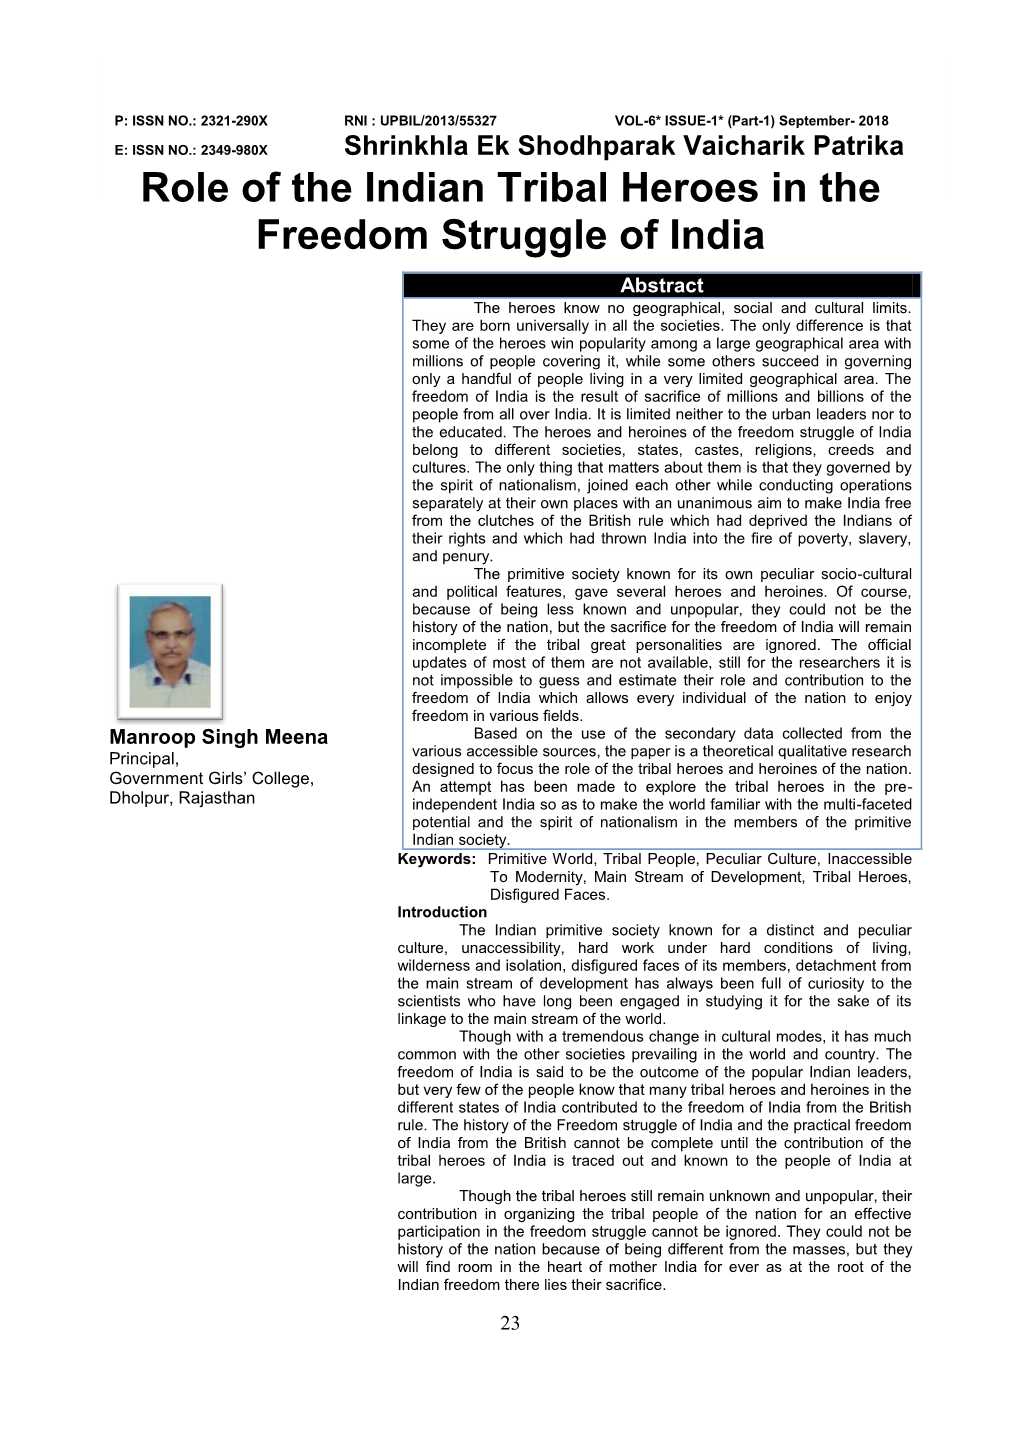 Role of the Indian Tribal Heroes in the Freedom Struggle of India Manroop